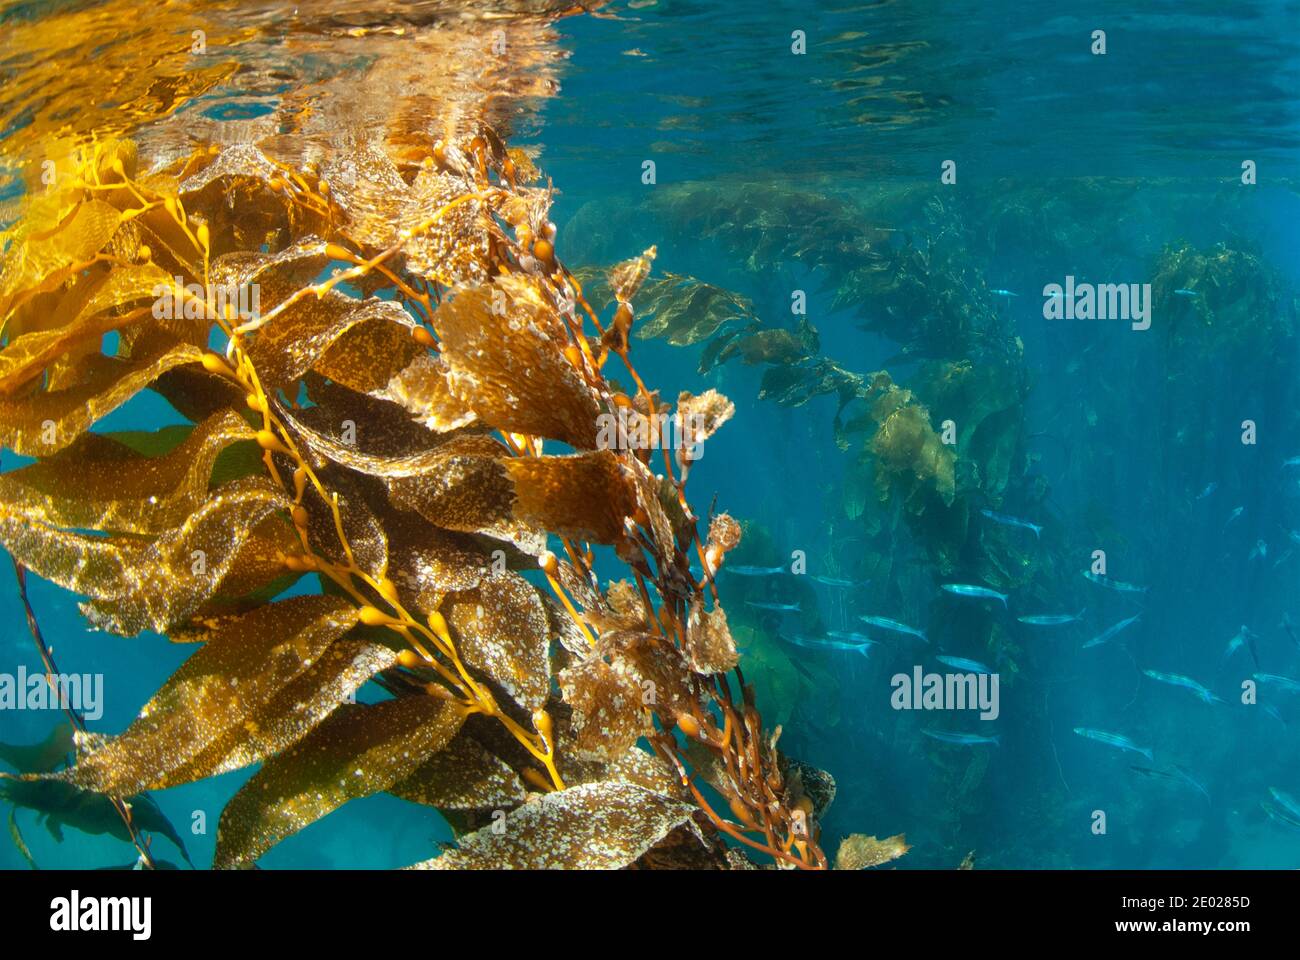 Sick unhealthy giant kelp, Kelp Forest in Southern California Stock Photo